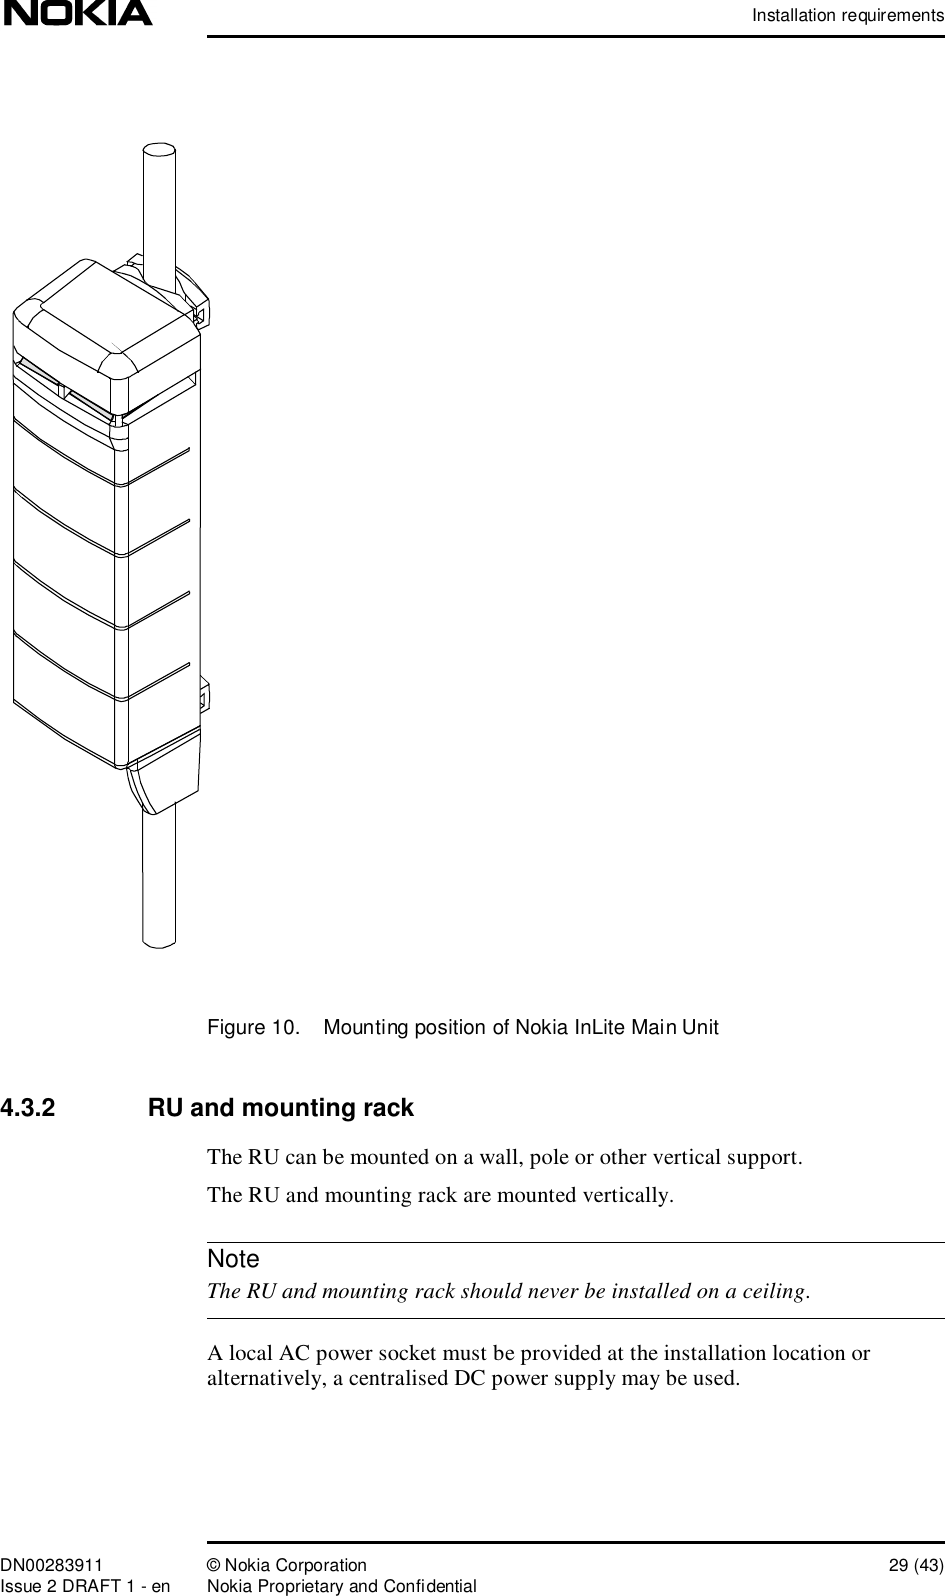 Installation requirementsDN00283911 © Nokia Corporation 29 (43)Issue 2 DRAFT 1 - en Nokia Proprietary and ConfidentialNoteFigure 10.  Mounting position of Nokia InLite Main Unit4.3.2  RU and mounting rackThe RU can be mounted on a wall, pole or other vertical support.The RU and mounting rack are mounted vertically.  The RU and mounting rack should never be installed on a ceiling.A local AC power socket must be provided at the installation location or alternatively, a centralised DC power supply may be used.